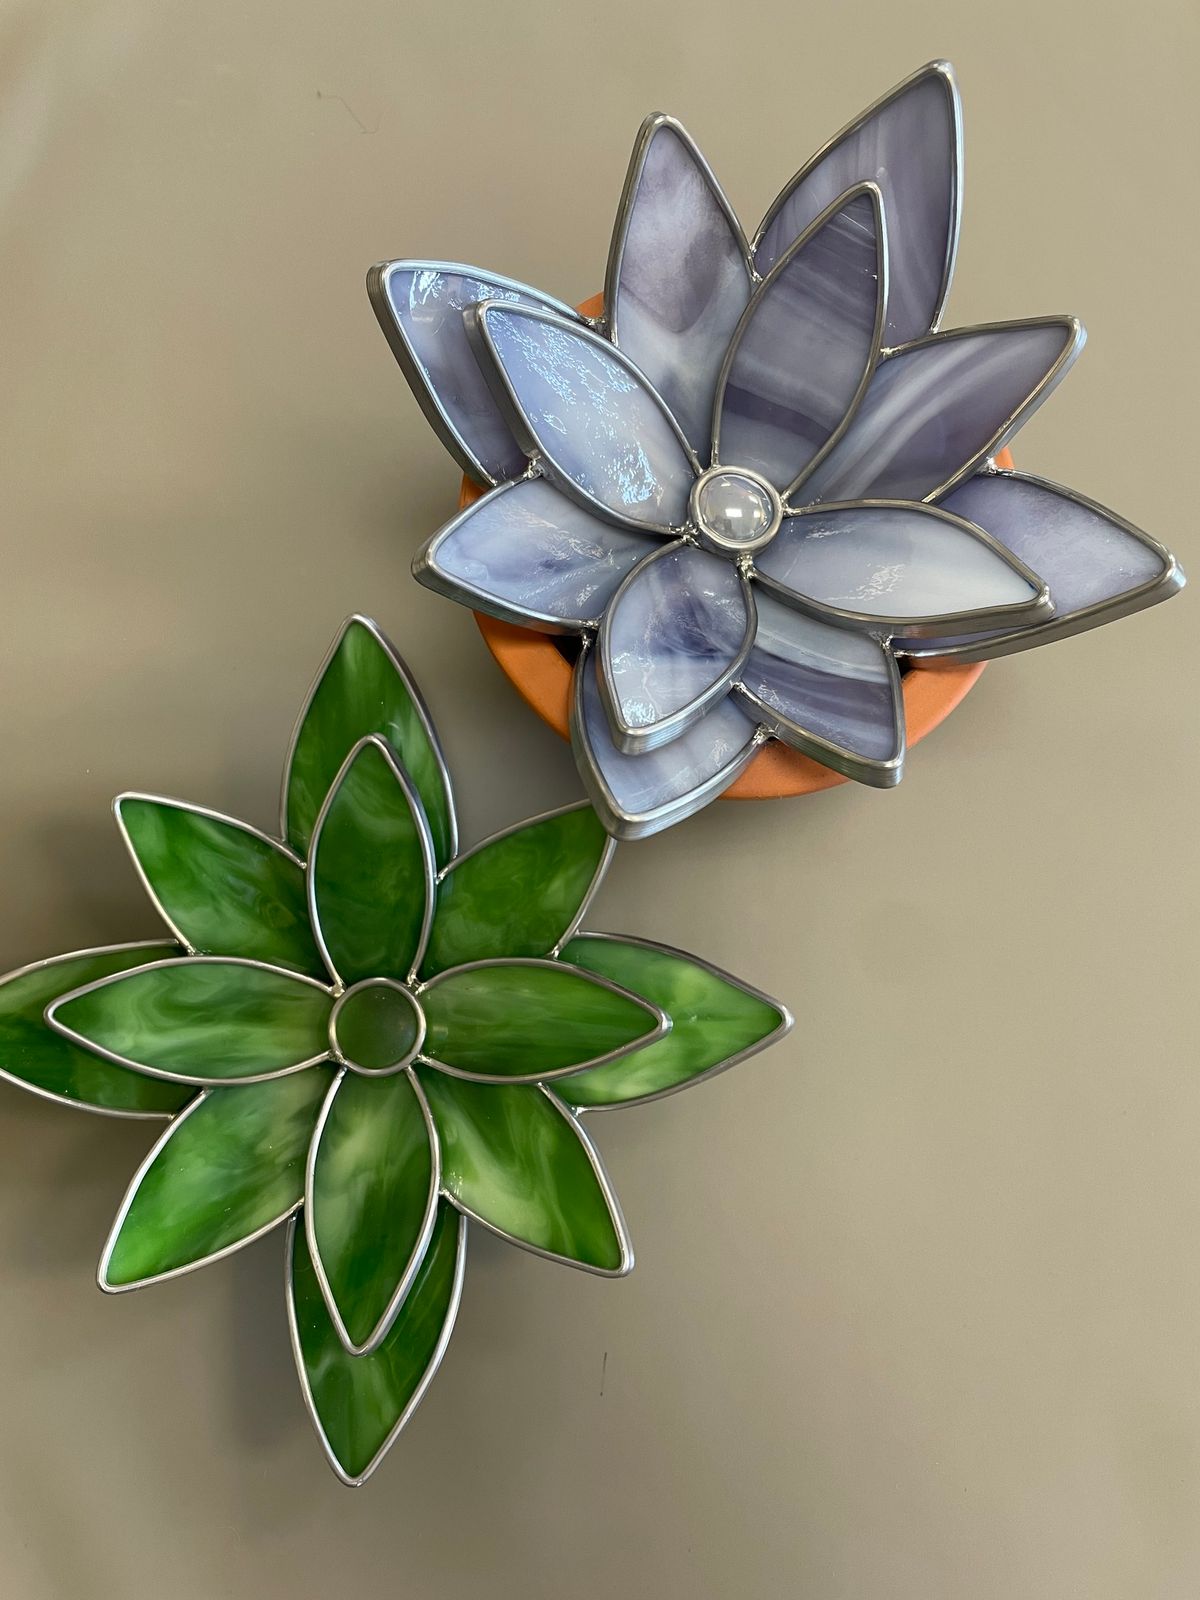 Stained Glass Succulent Class @ My New Favorite Thing